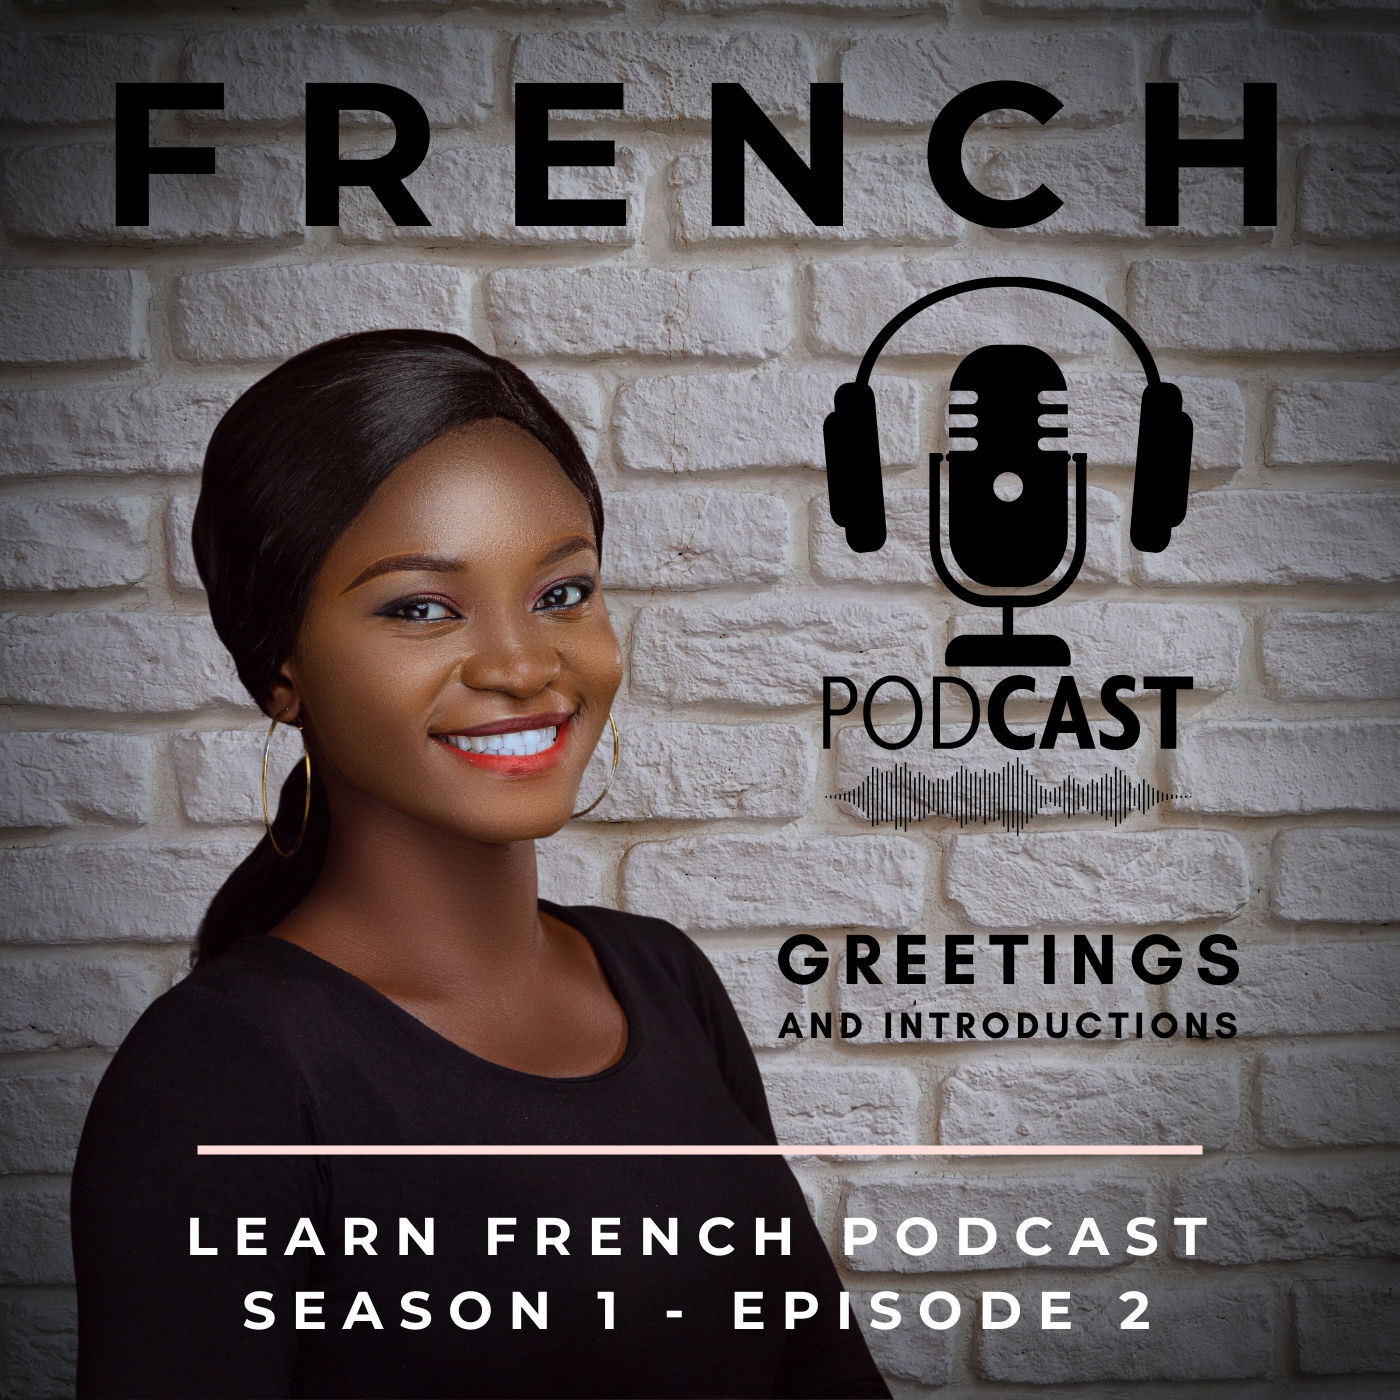 Learn French Podcast: Greetings and Introductions (Season 1, Episode 2)